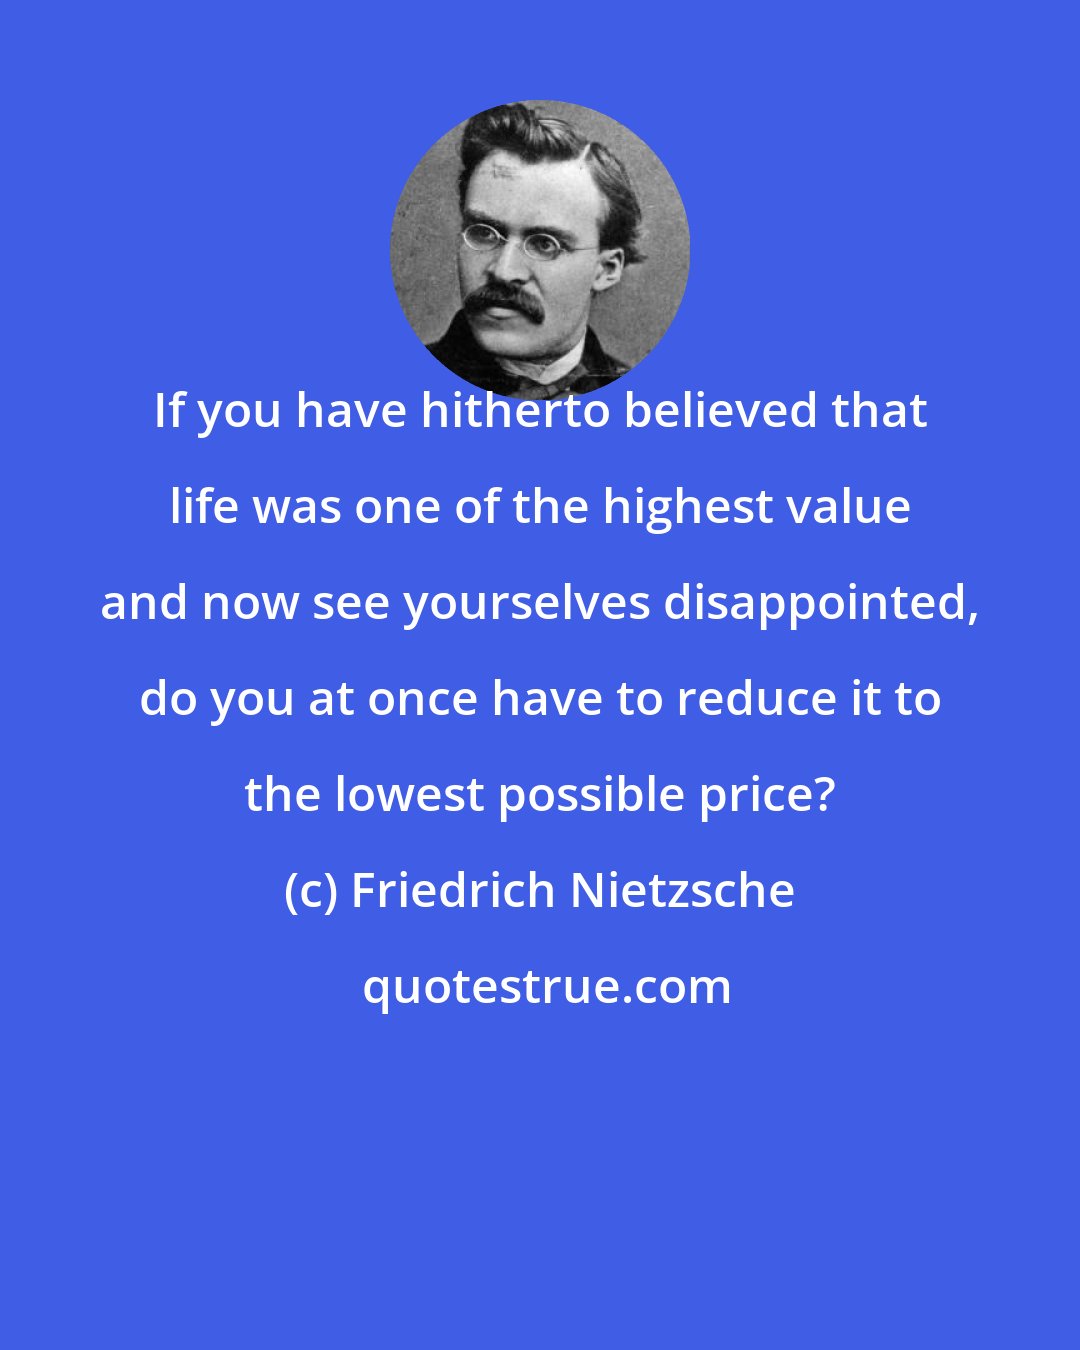 Friedrich Nietzsche: If you have hitherto believed that life was one of the highest value and now see yourselves disappointed, do you at once have to reduce it to the lowest possible price?